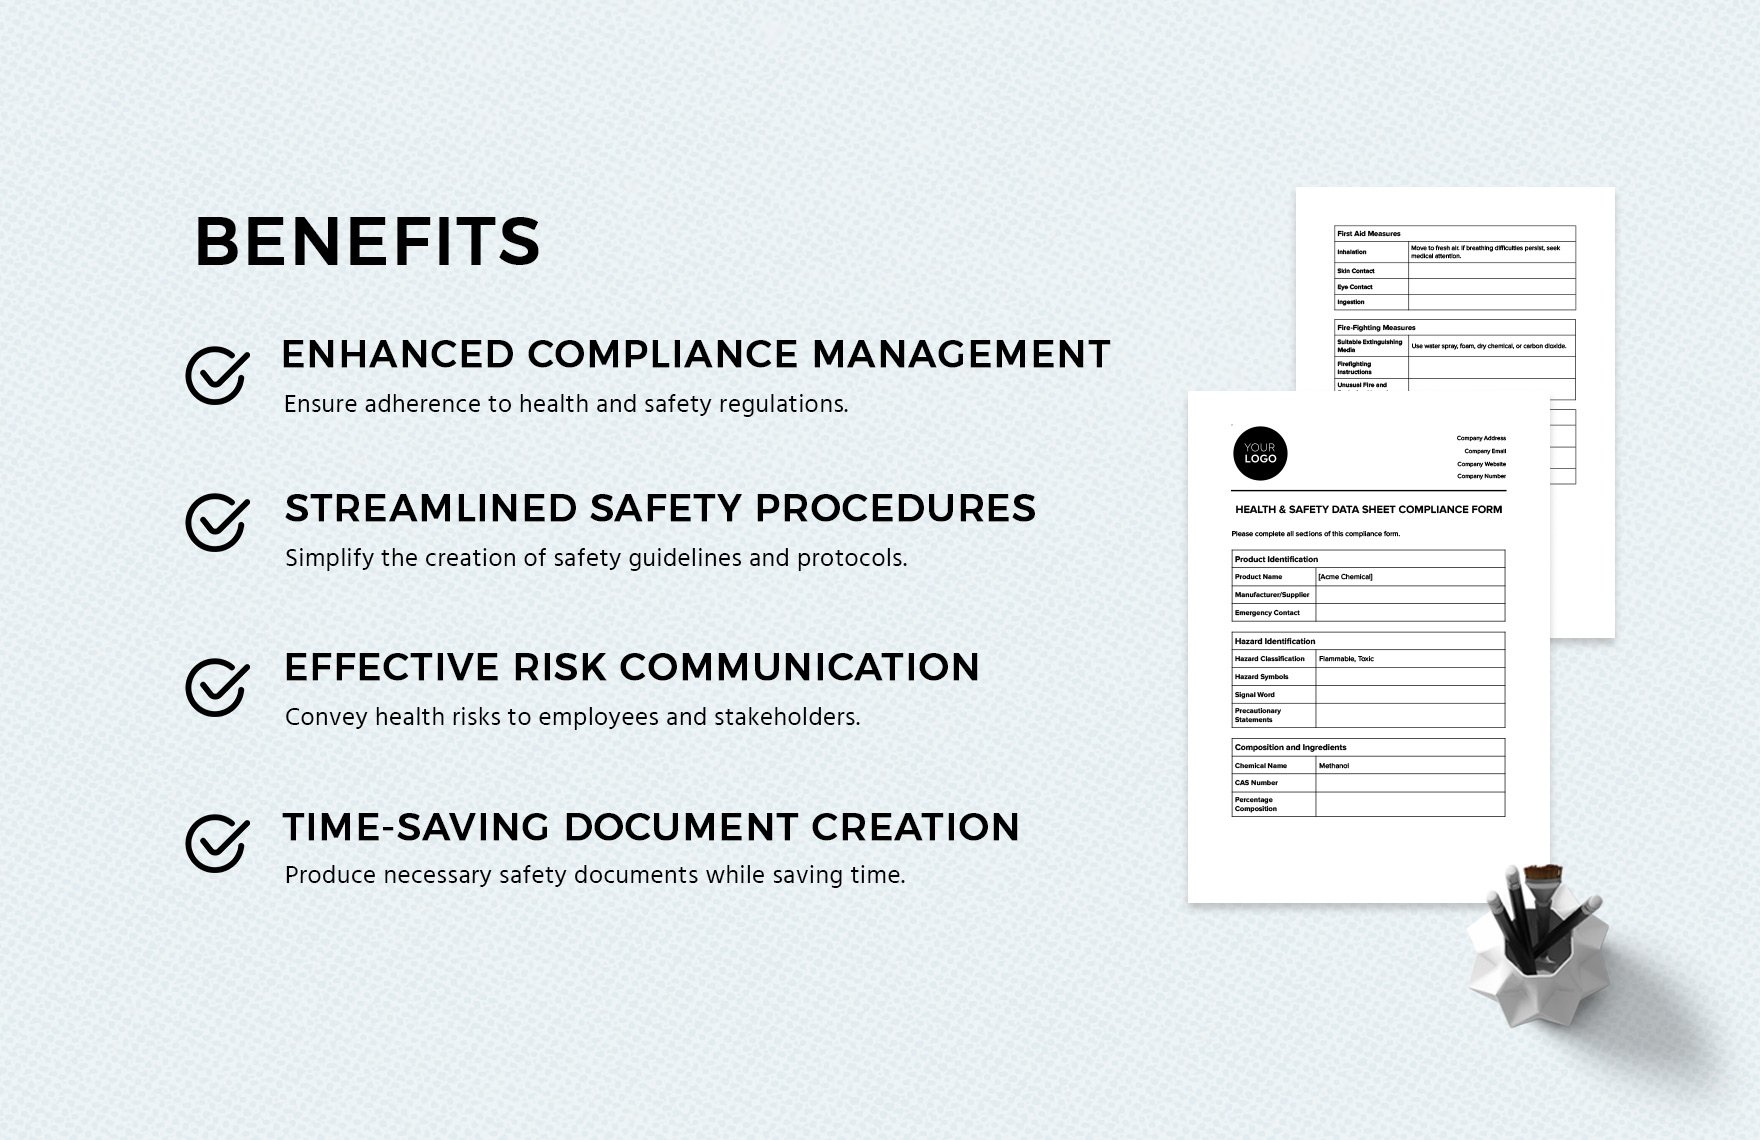 Health & Safety Data Sheet Compliance Form Template